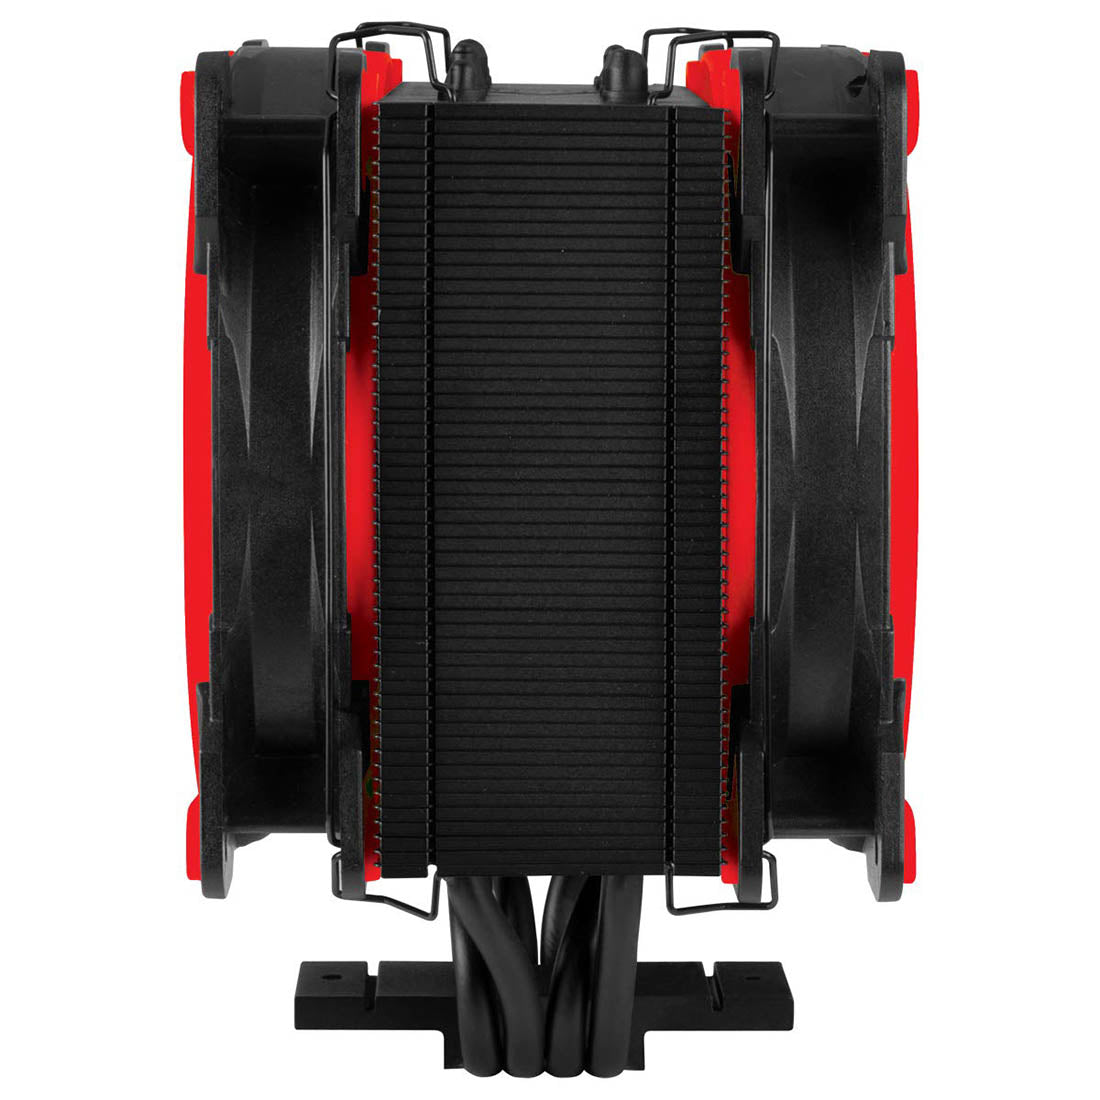 ARCTIC Freezer 34 eSports DUO Tower CPU Air Cooler with 120mm BioniX-P Fan - Red